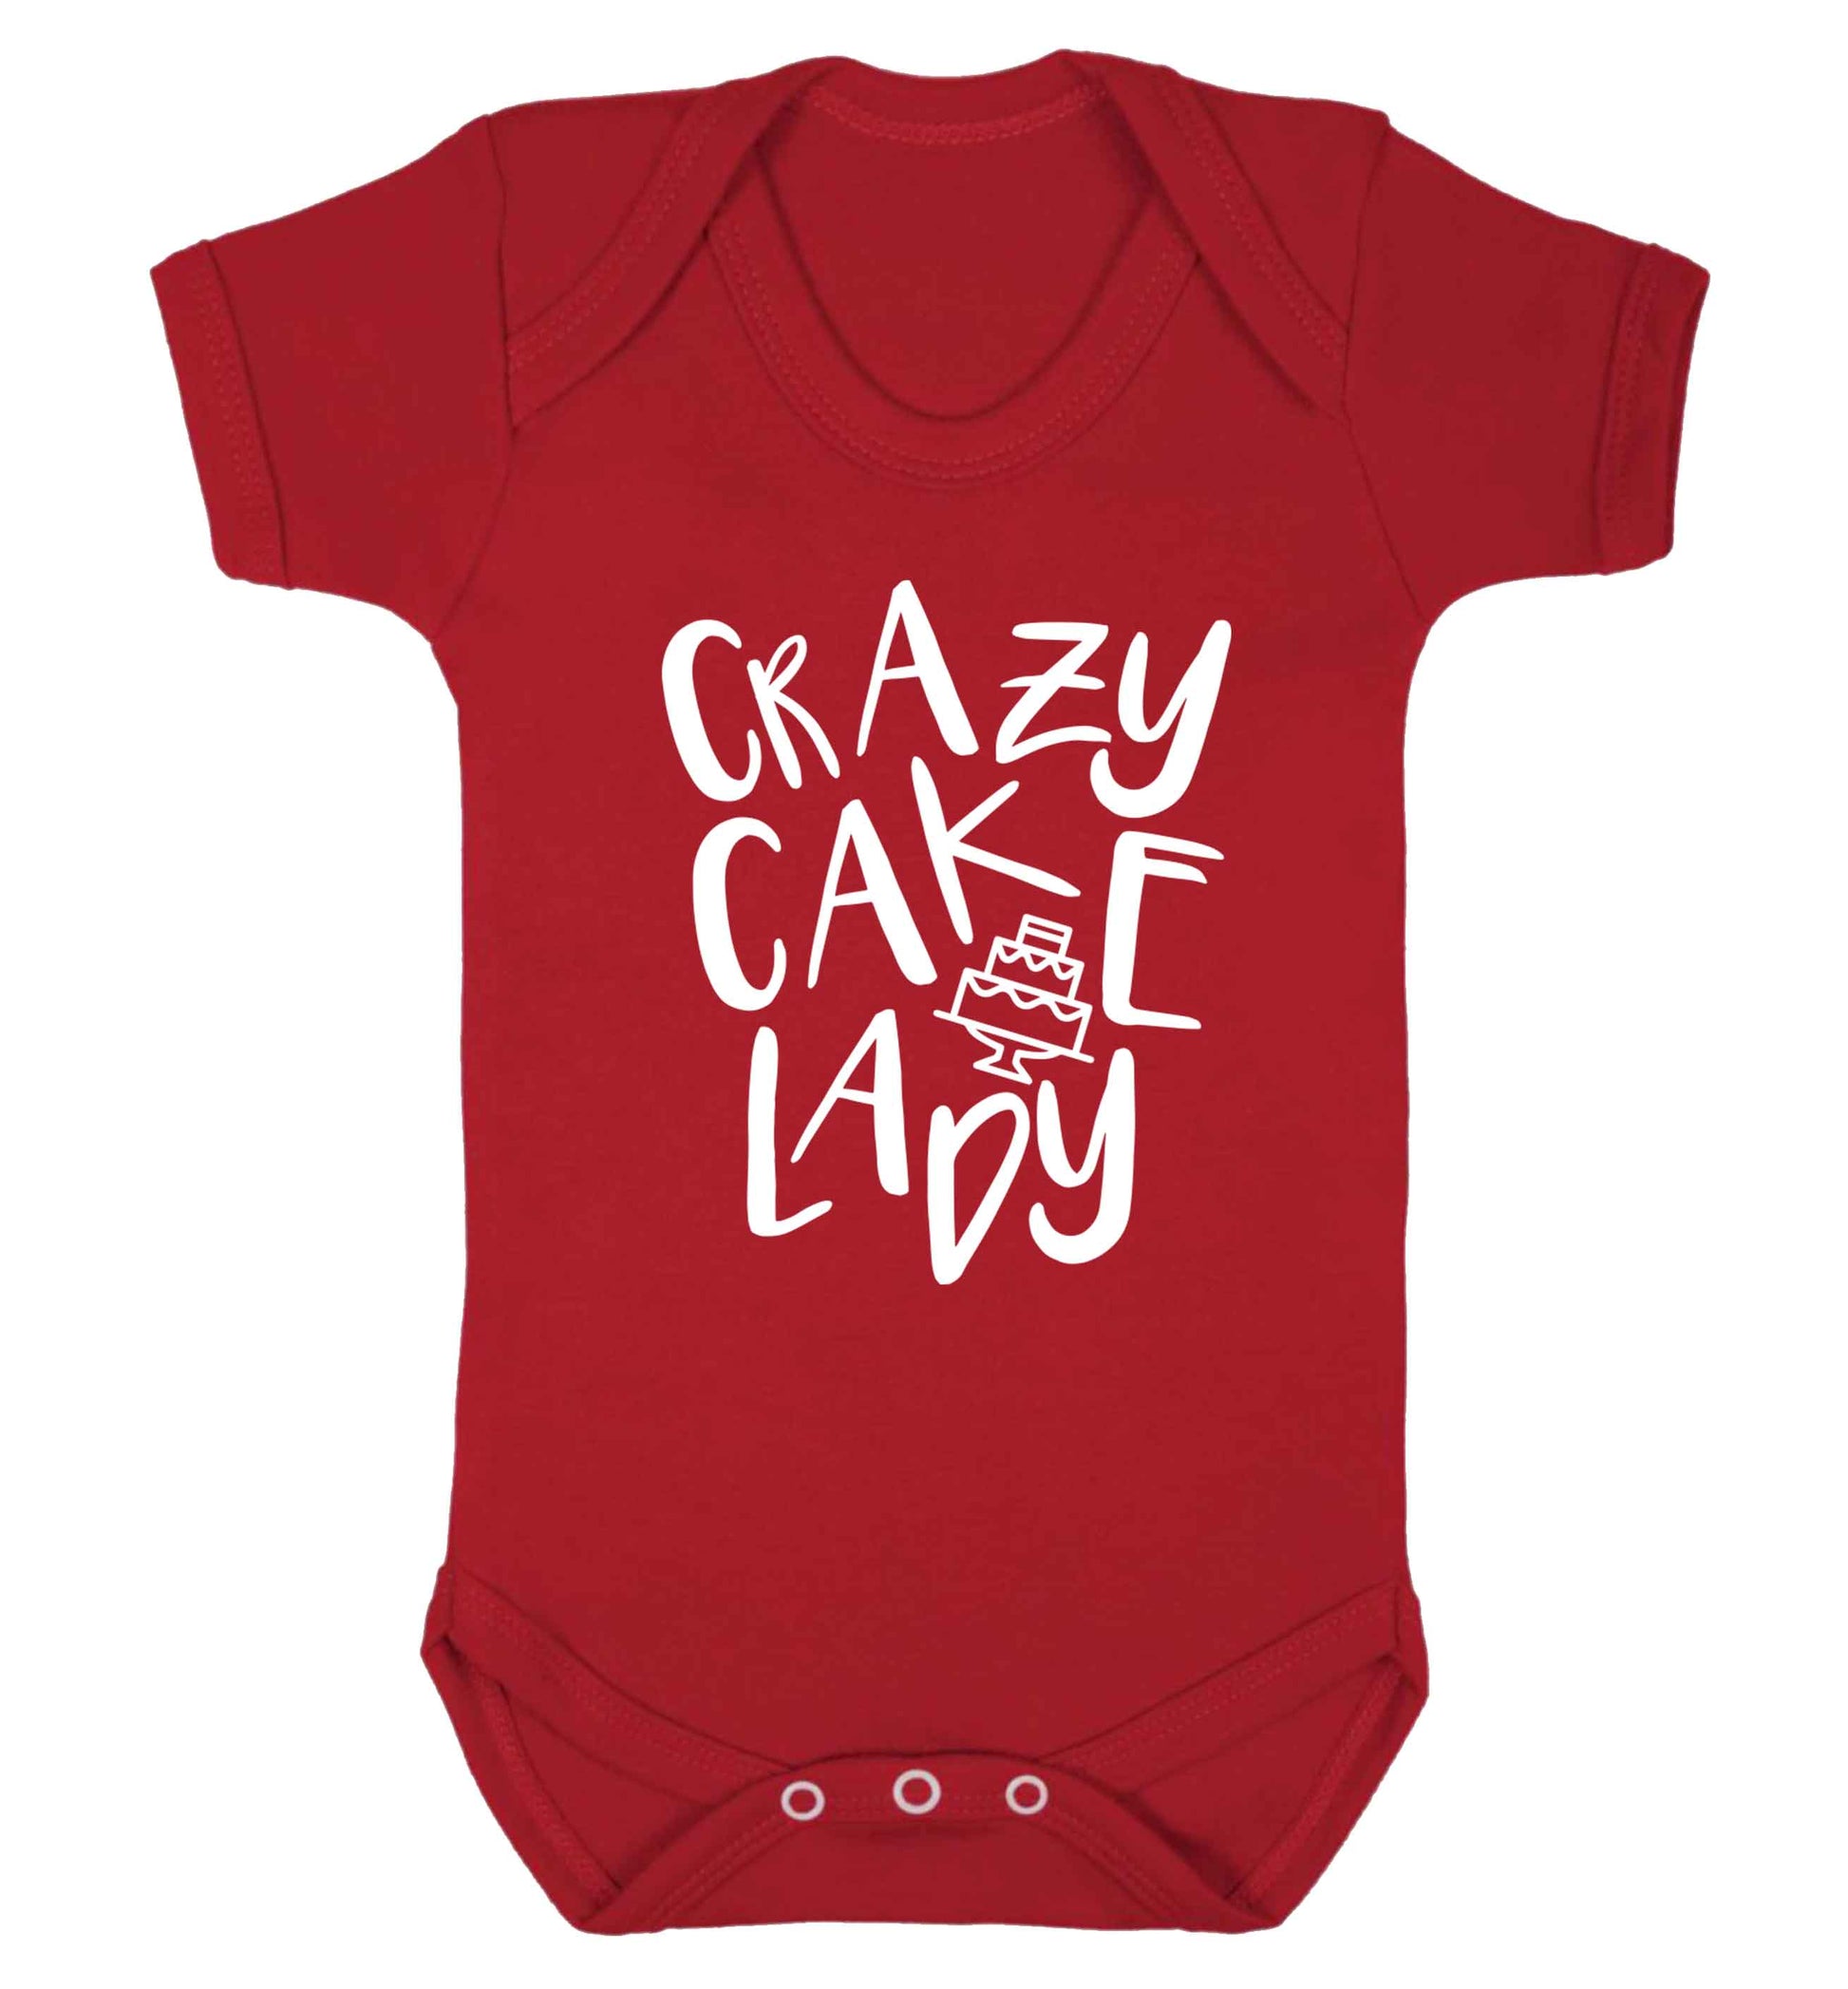 Crazy cake lady Baby Vest red 18-24 months